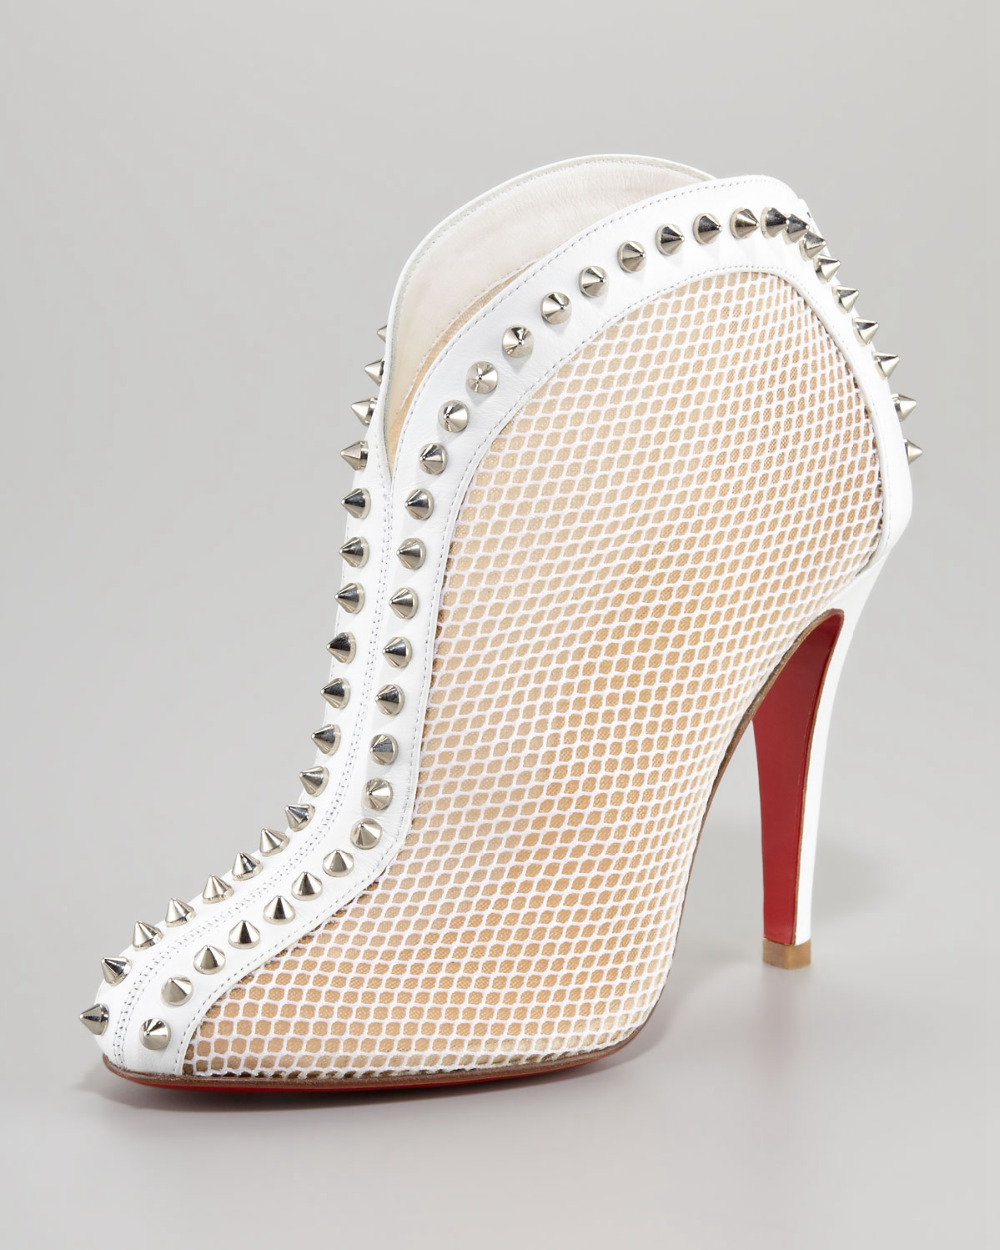 Mesh Pump Red Bottom Promotion-Shop for Promotional Mesh Pump Red ...